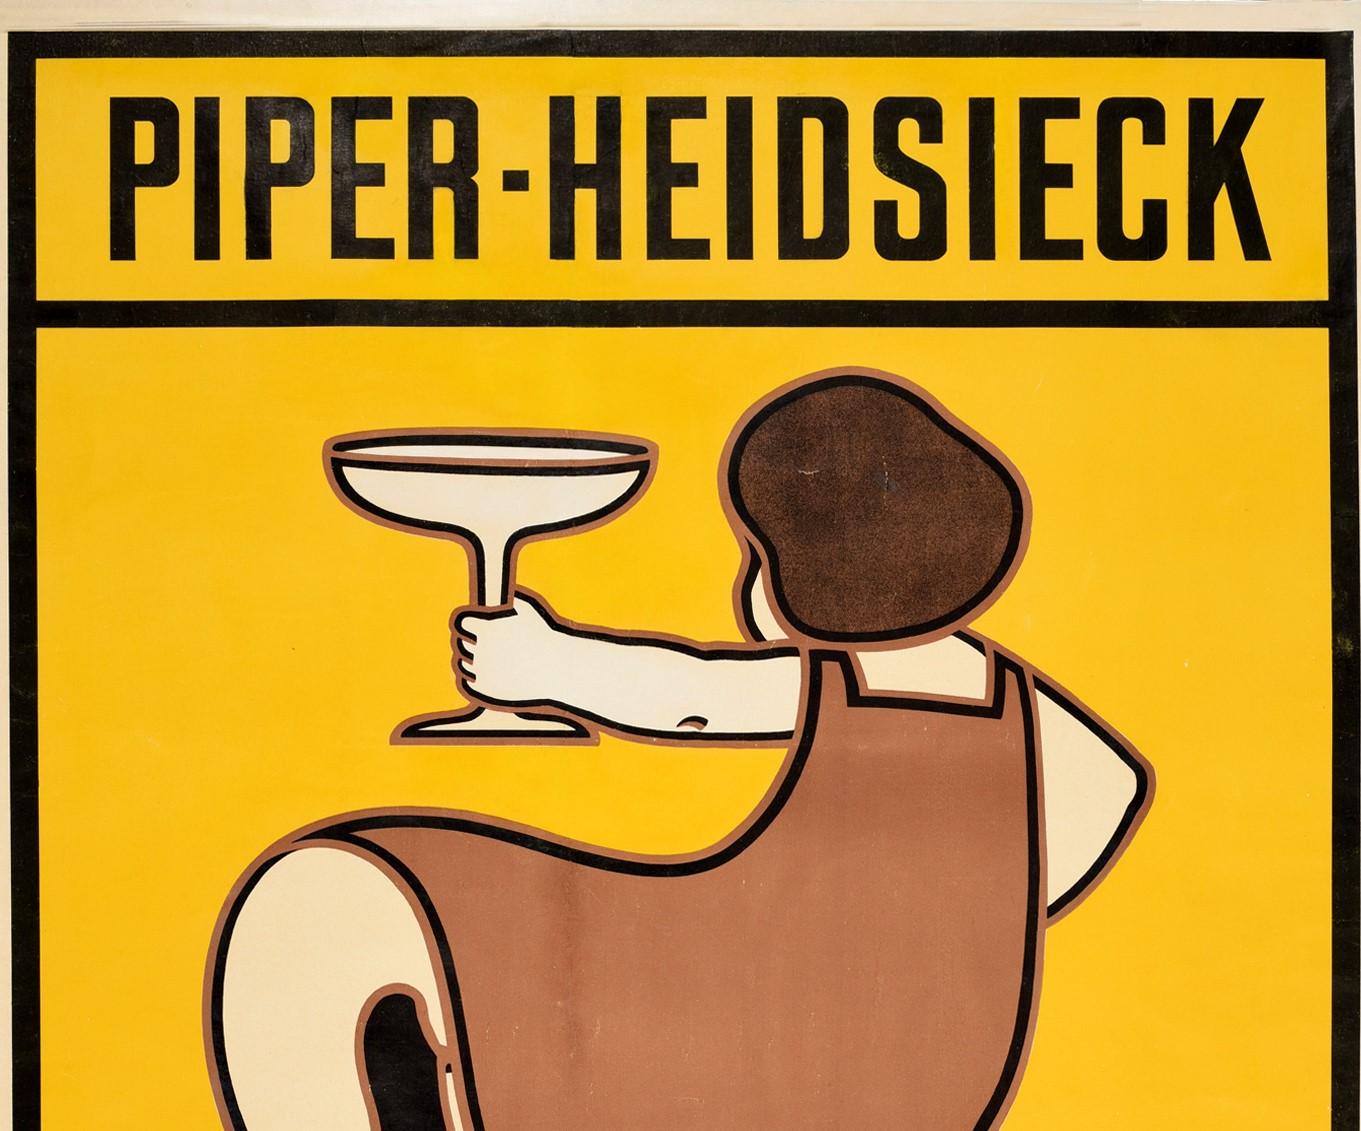 Original Antique Poster Piper Heidsieck Champagne Reims Wine Drink Art France - Print by Unknown